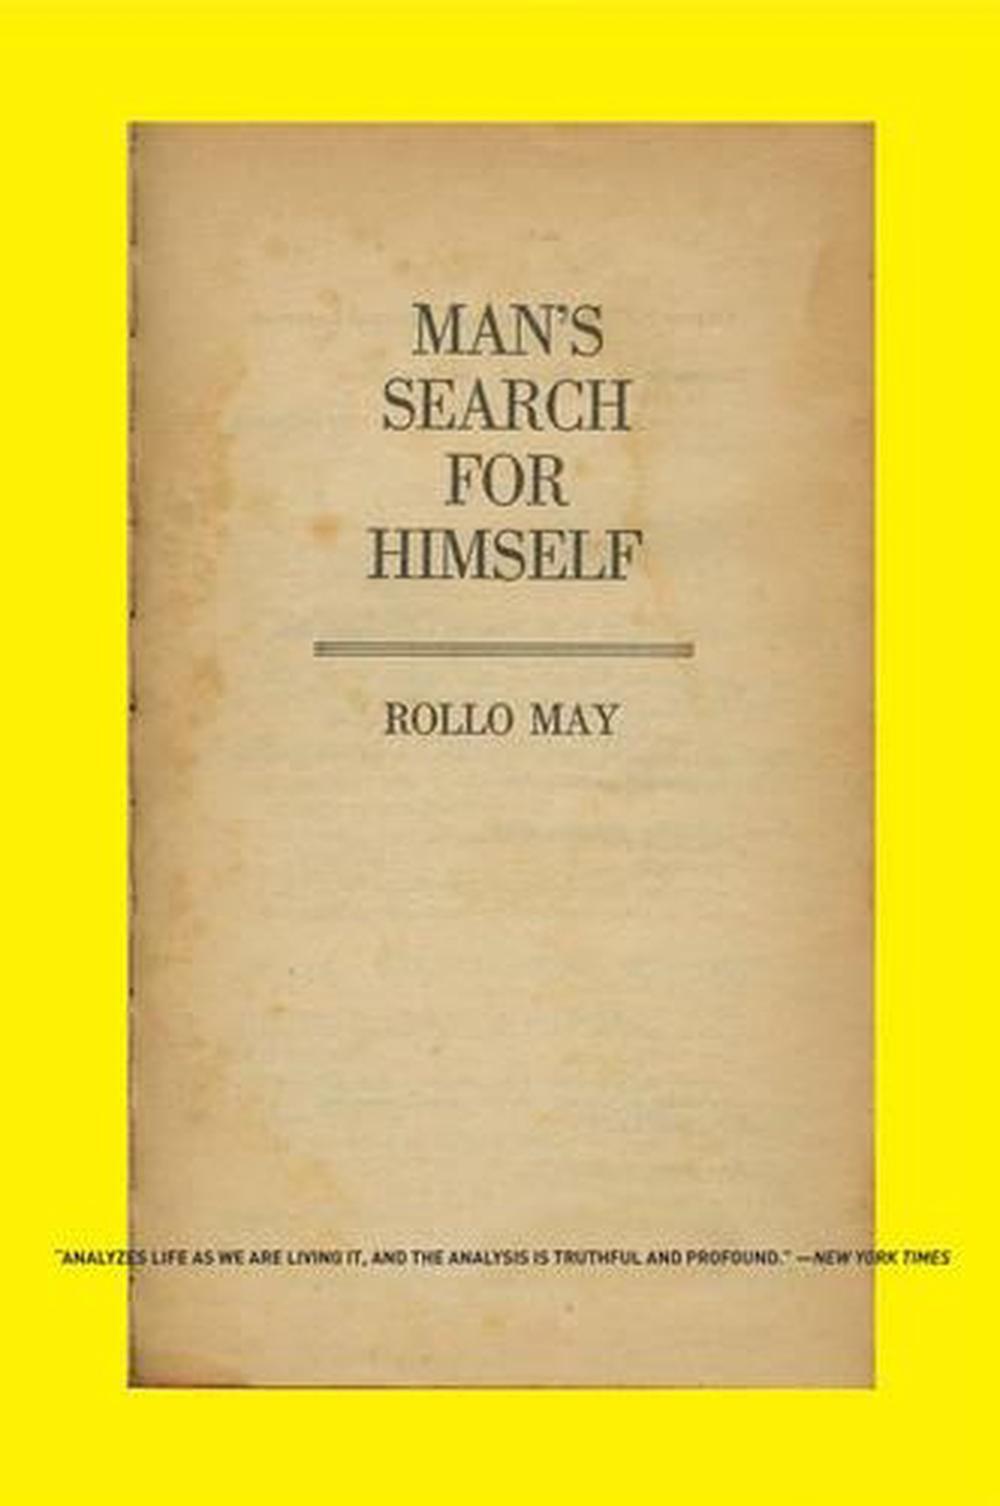 every man for himself book